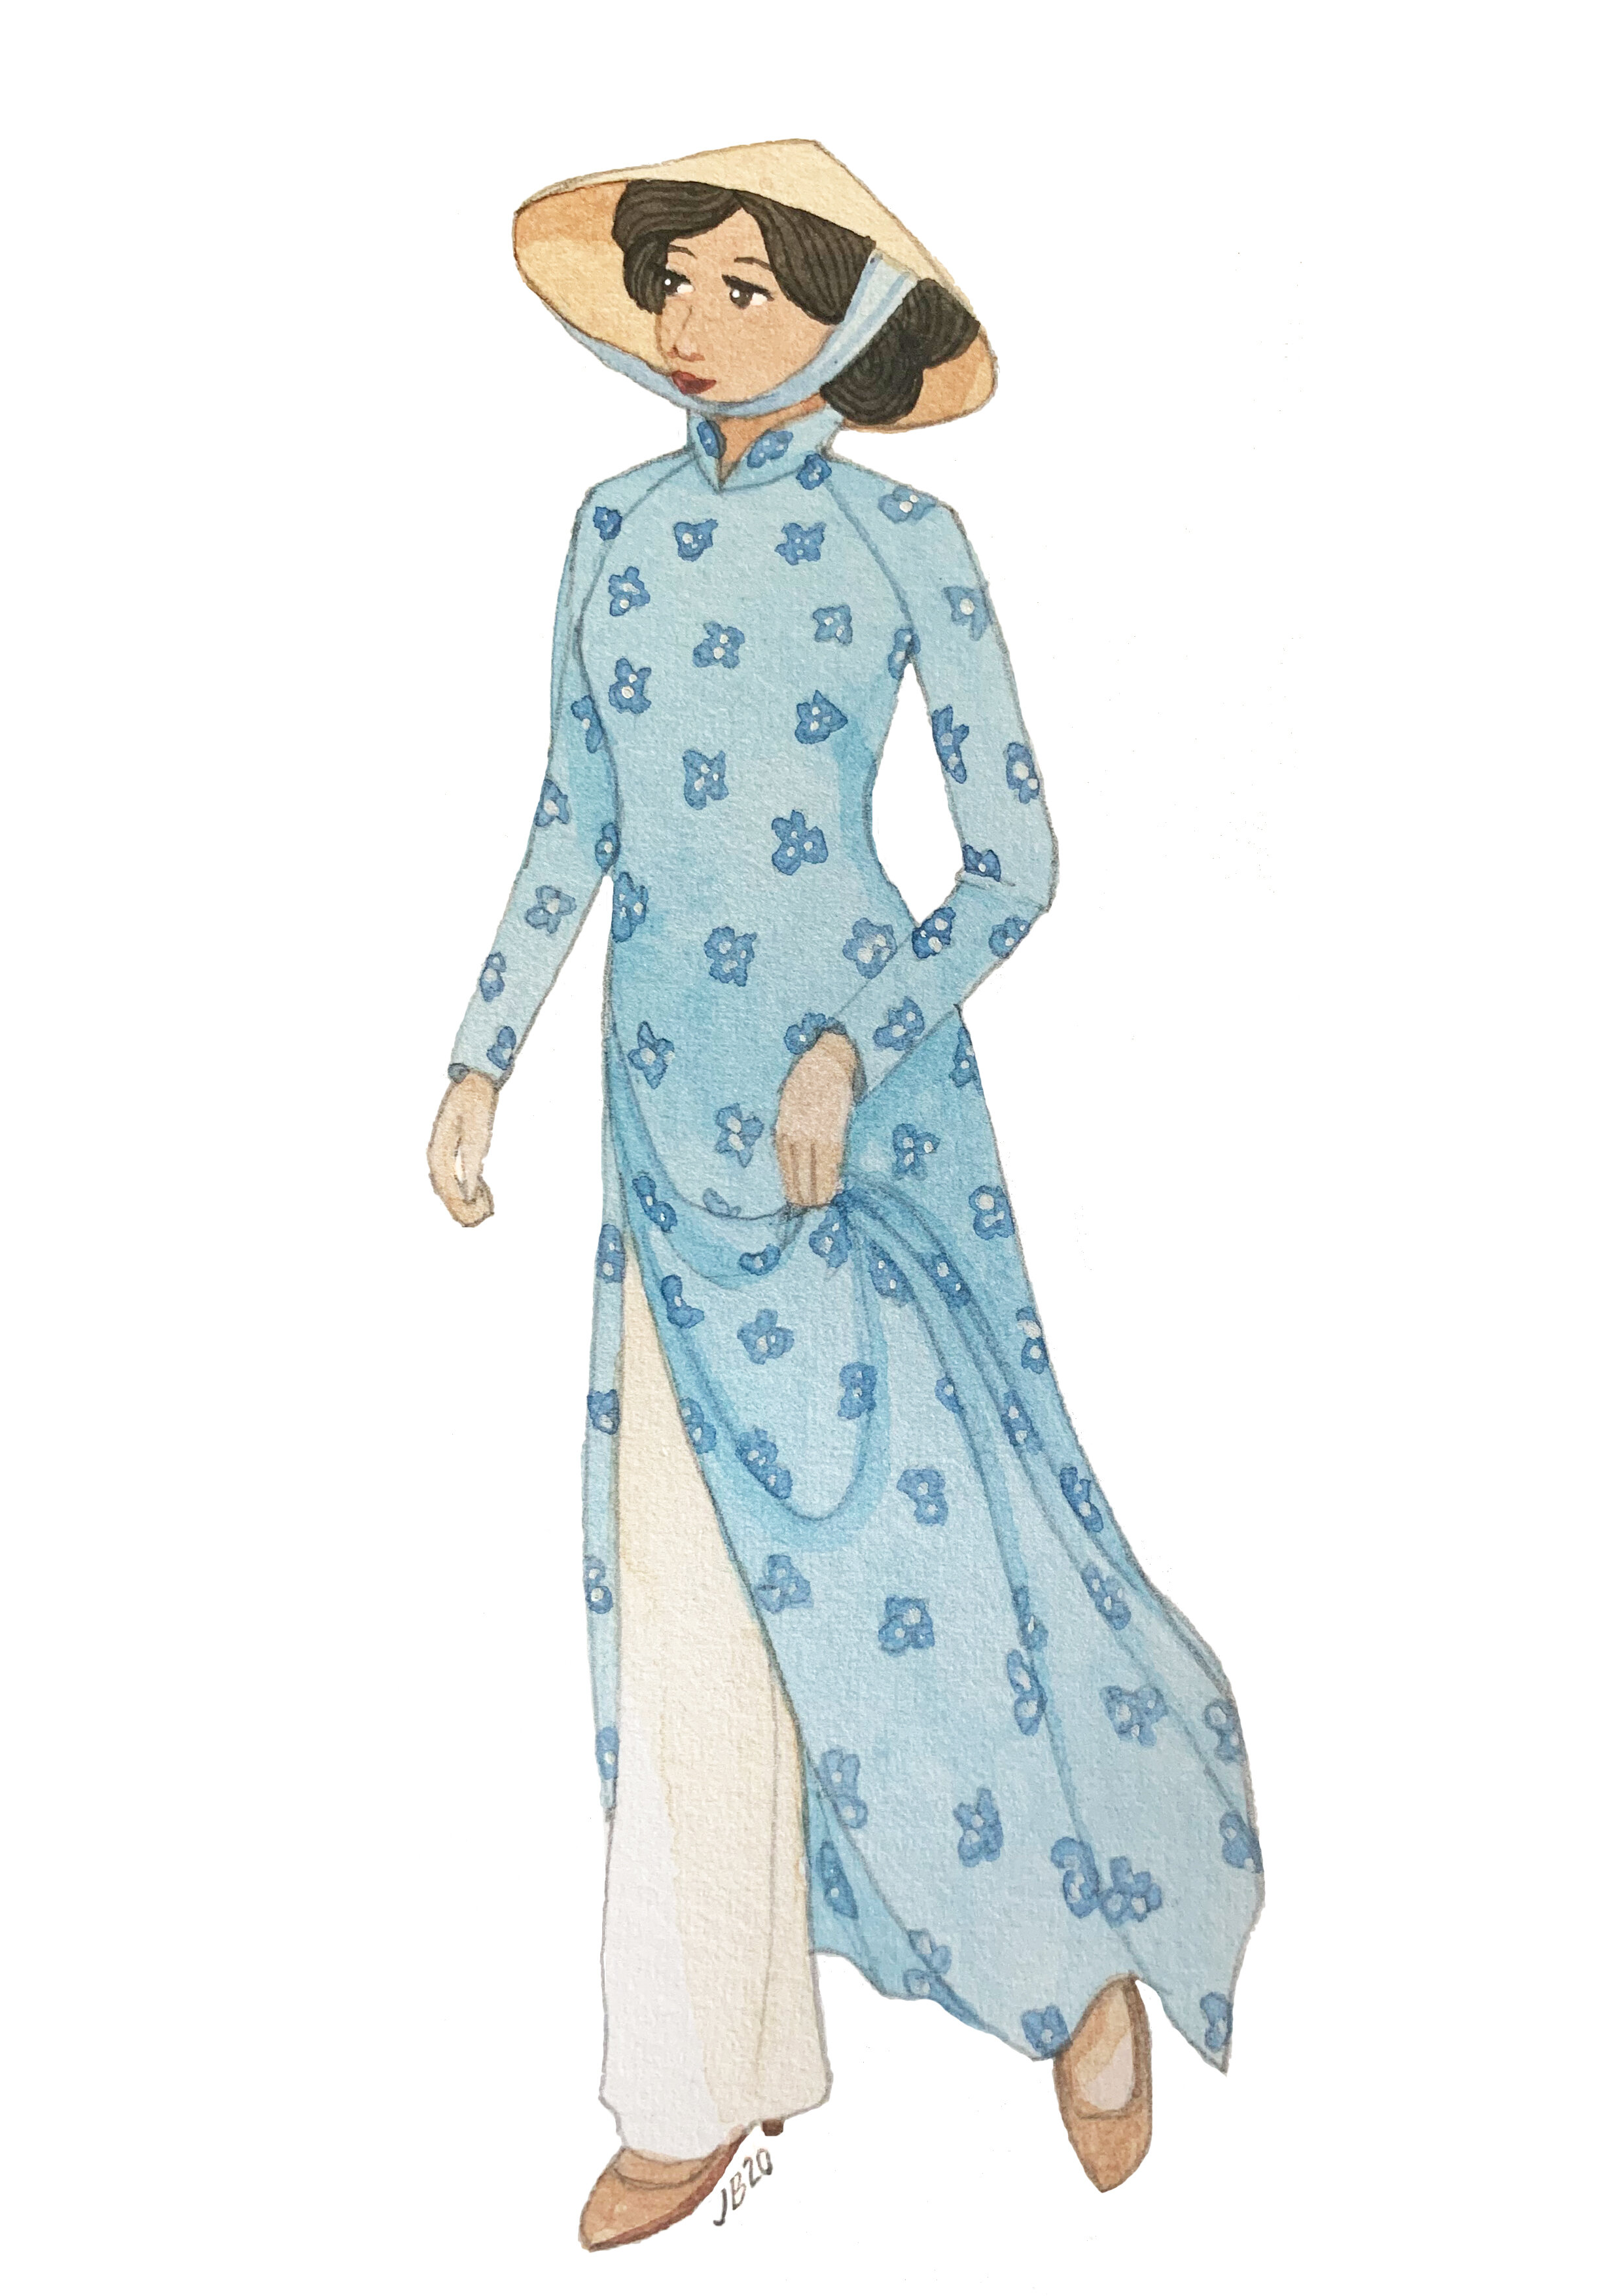 Everything You Need To Know About Ao Dai – ELPIS GLOBAL